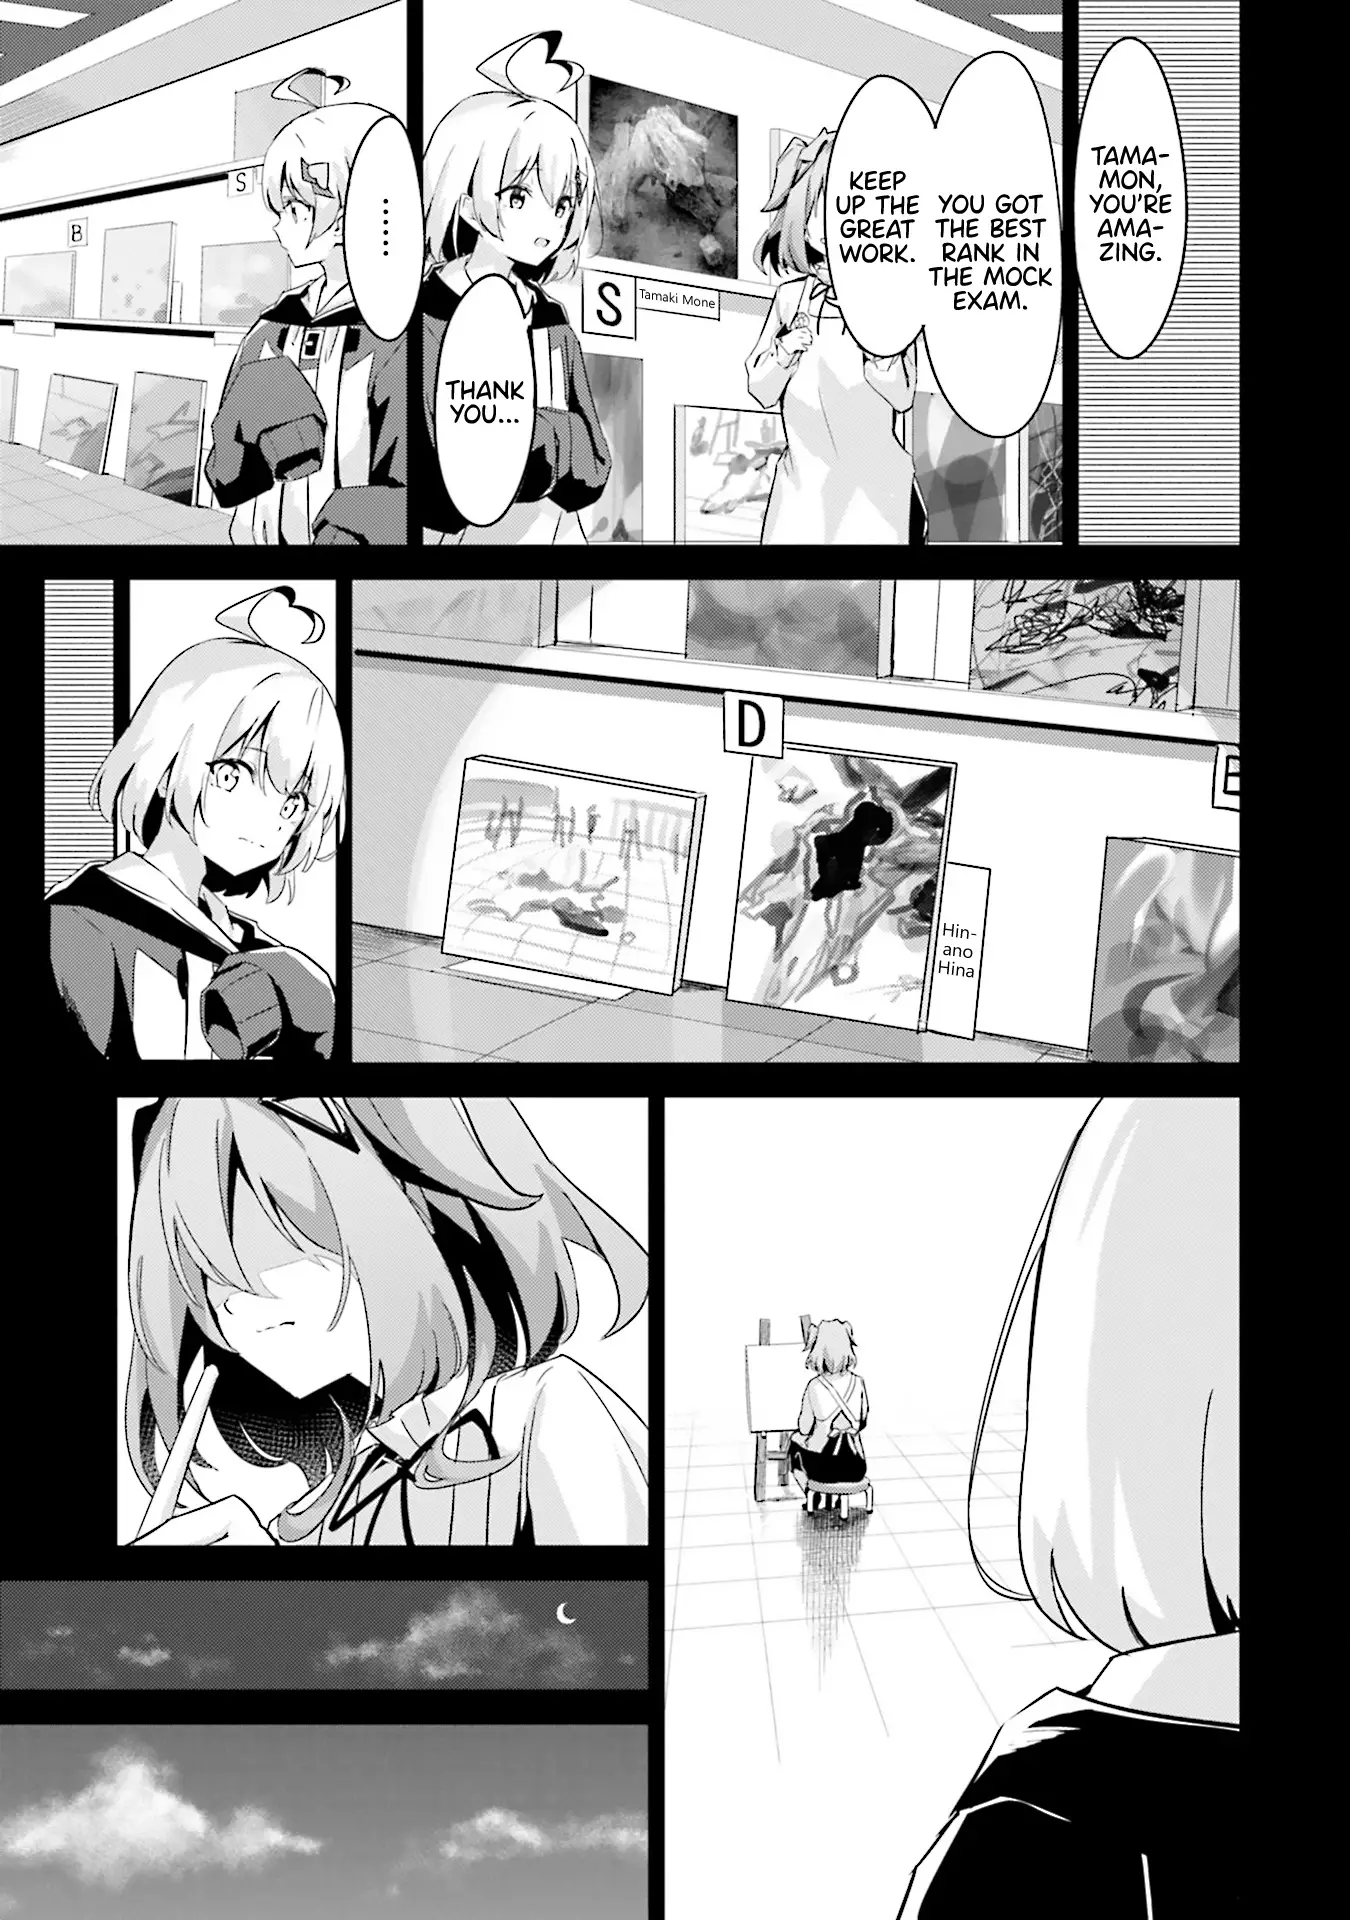 Momoiro Montage - 5 page 9-8ae16d0a